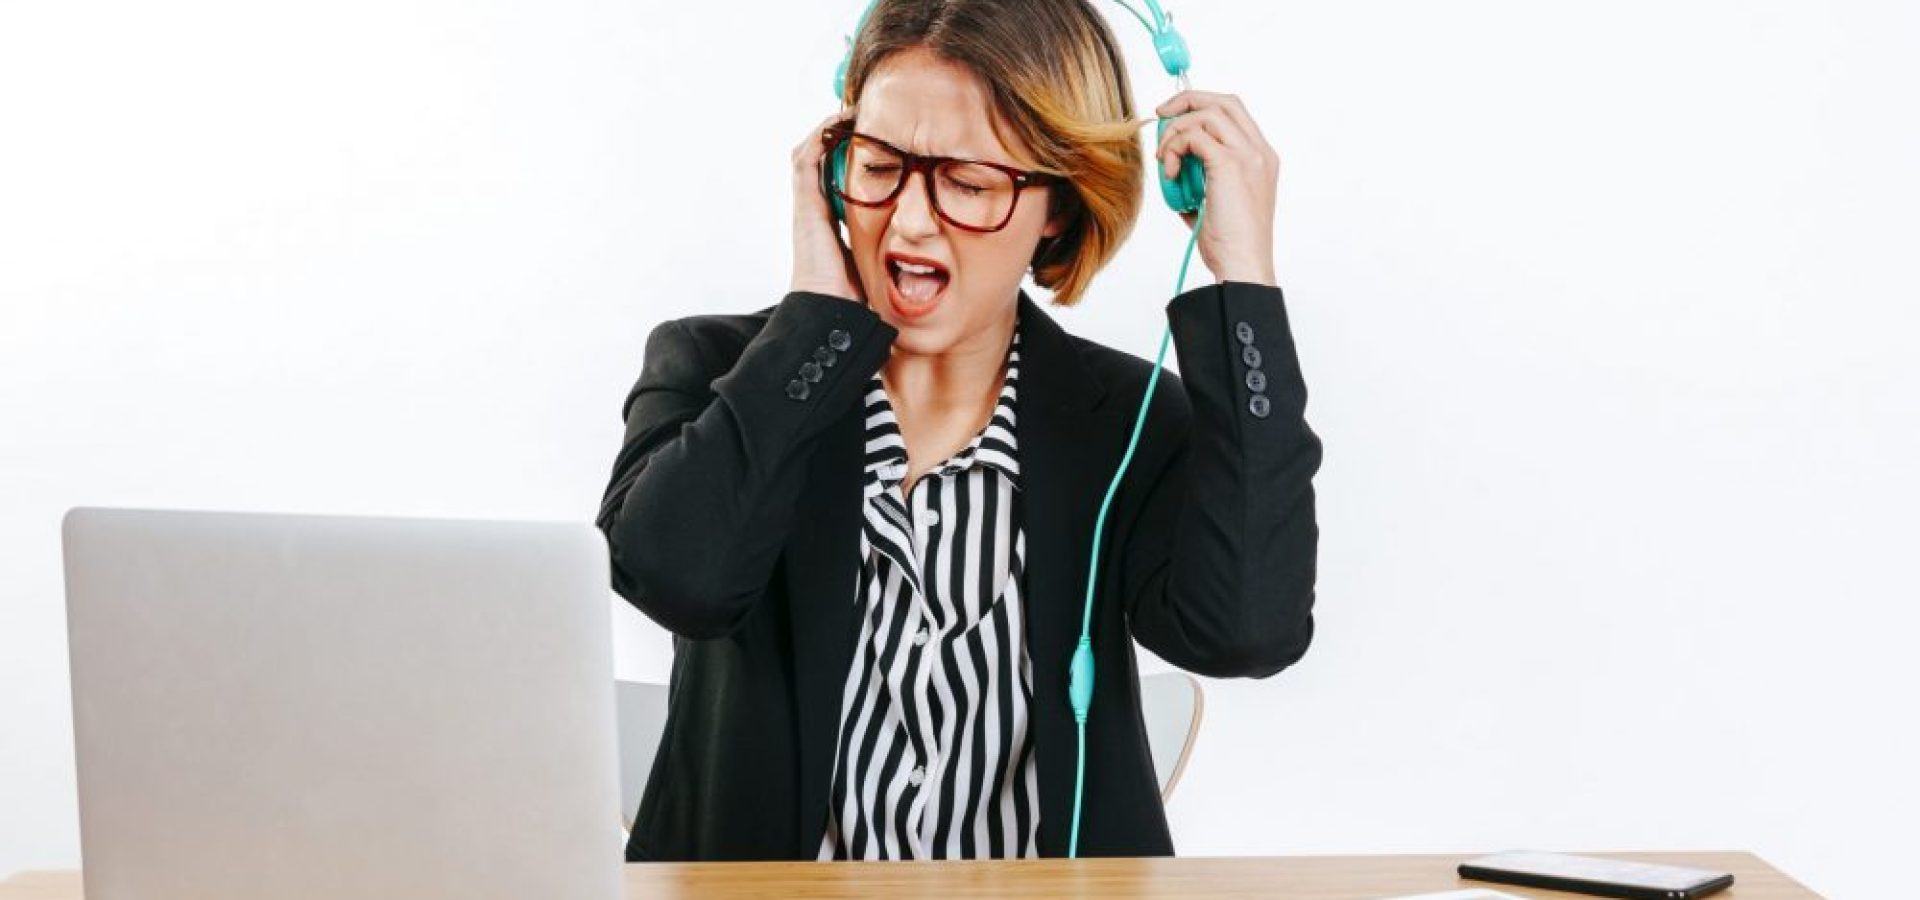 Woman wearing headphones startled by loud noise, takes them off to look after your hearing health